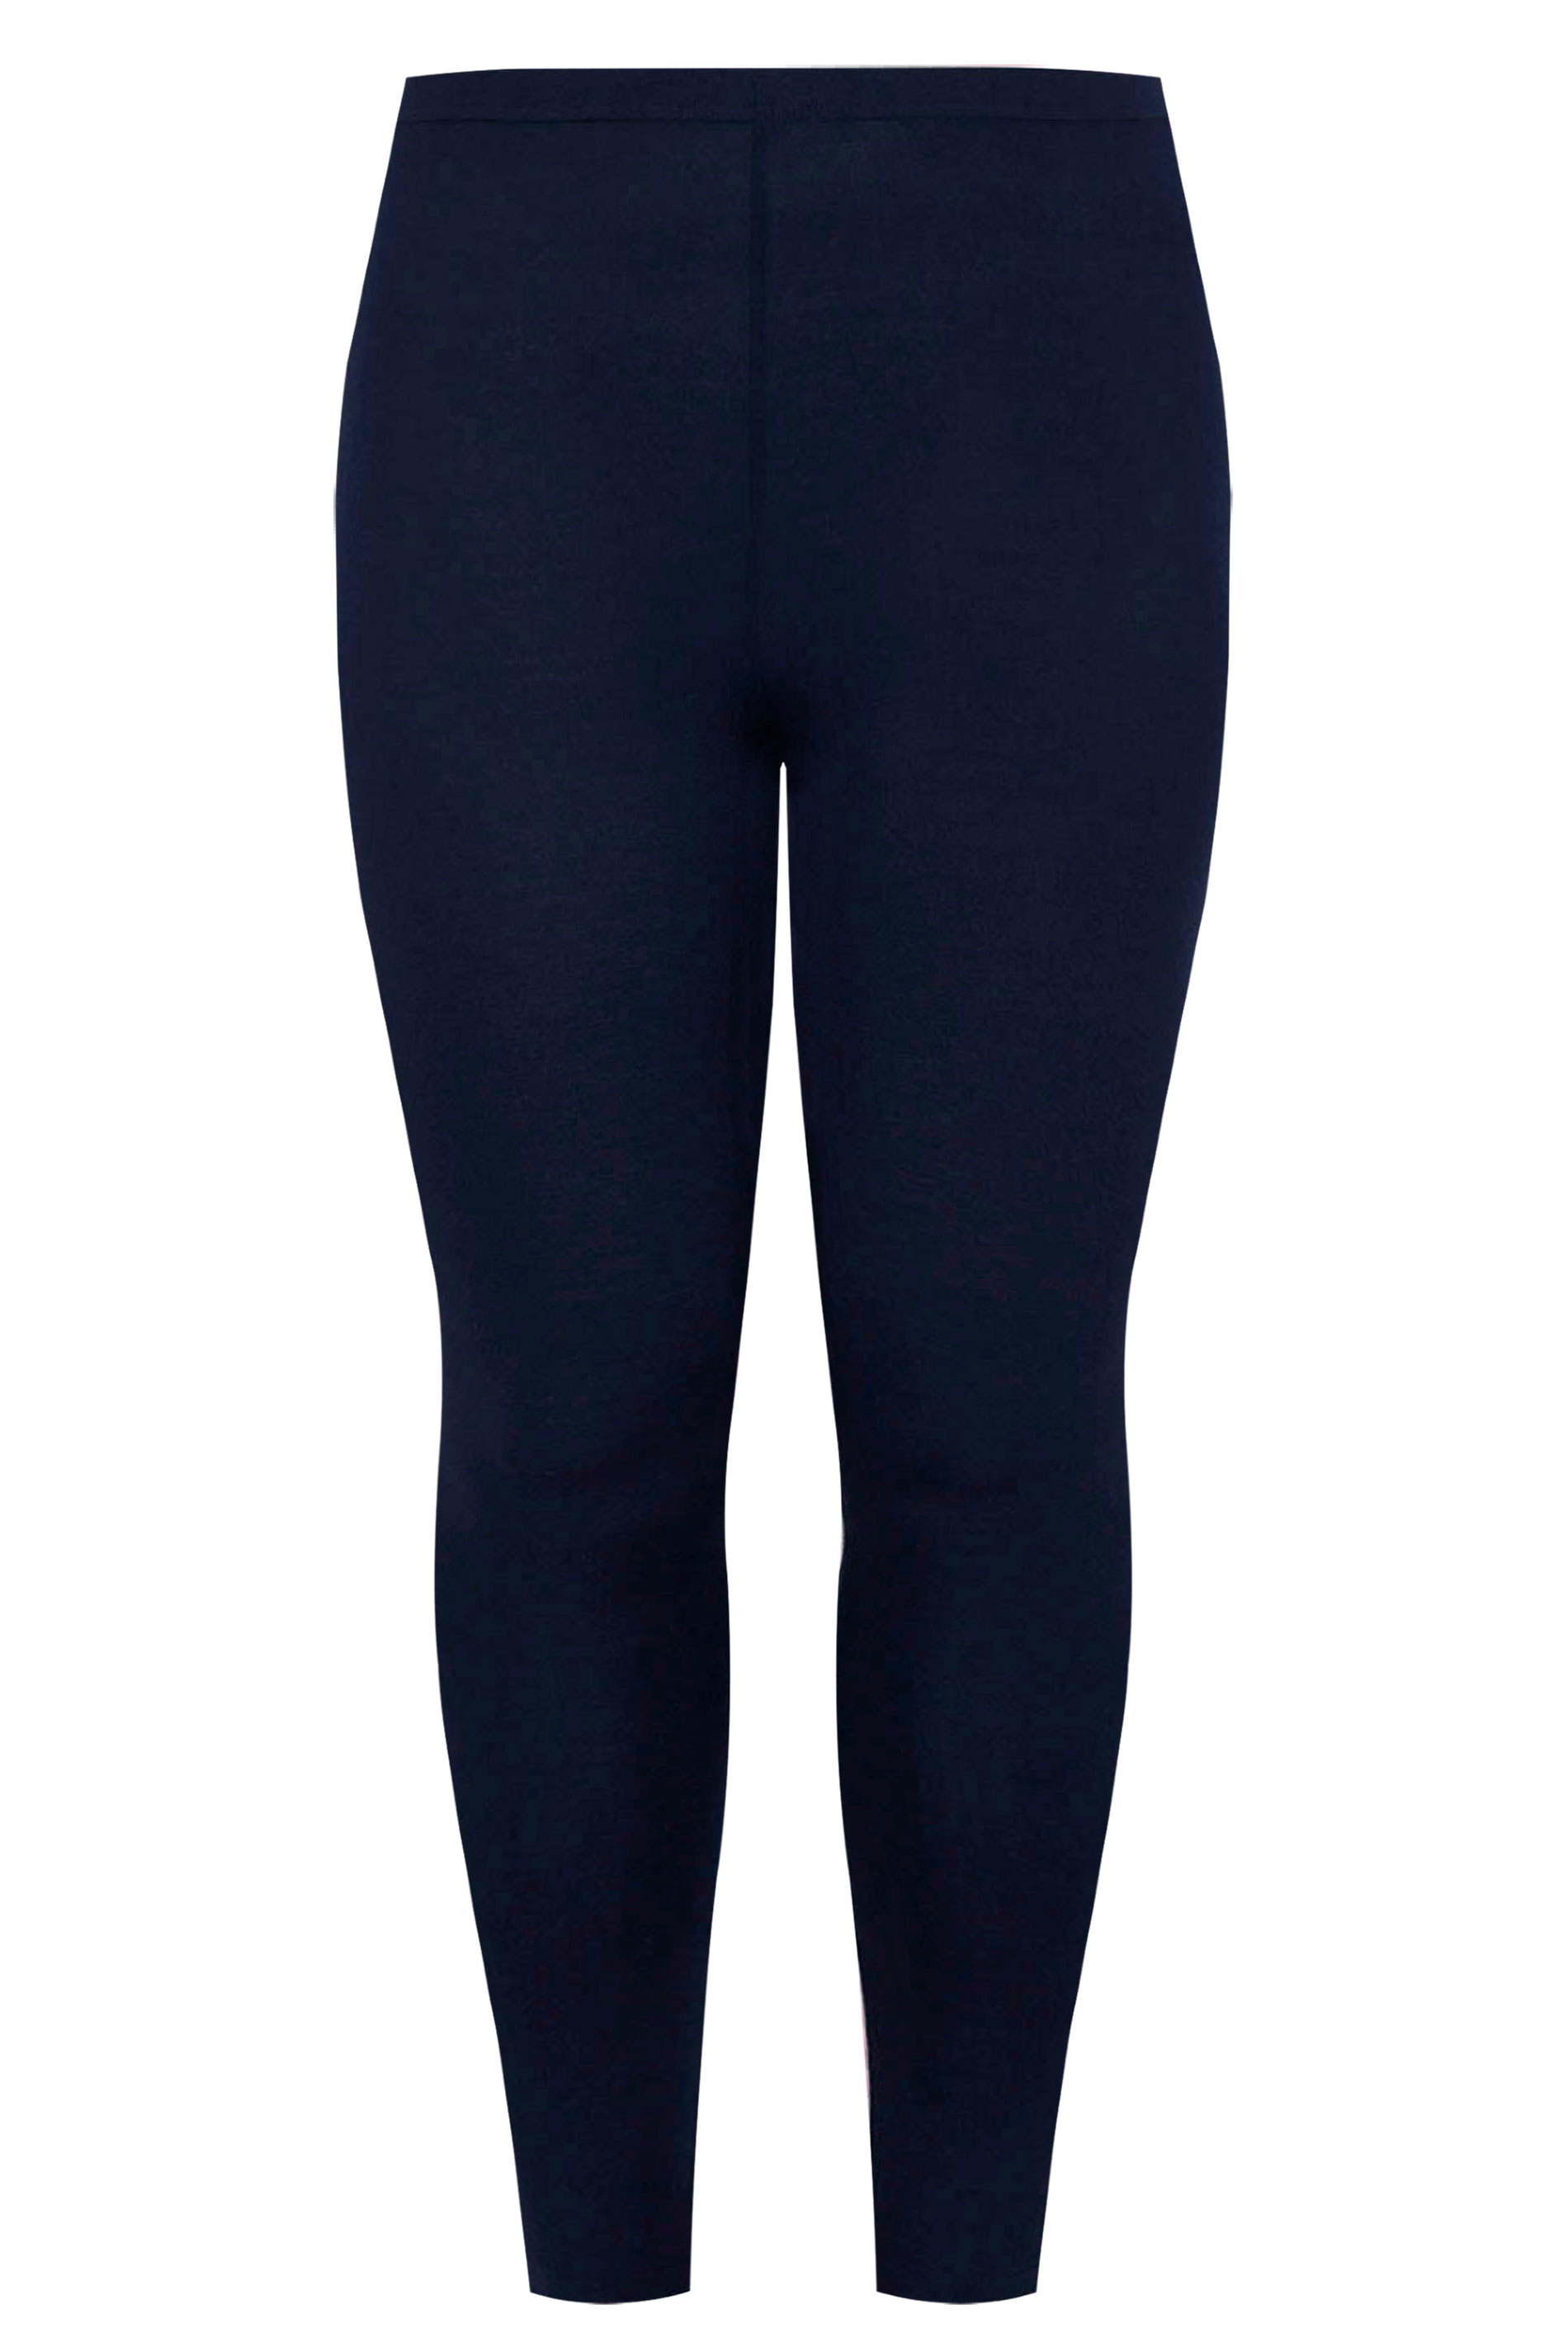 Navy Knee Length Cotton Leggings for Women | Daily Wear Comfortable Shorts